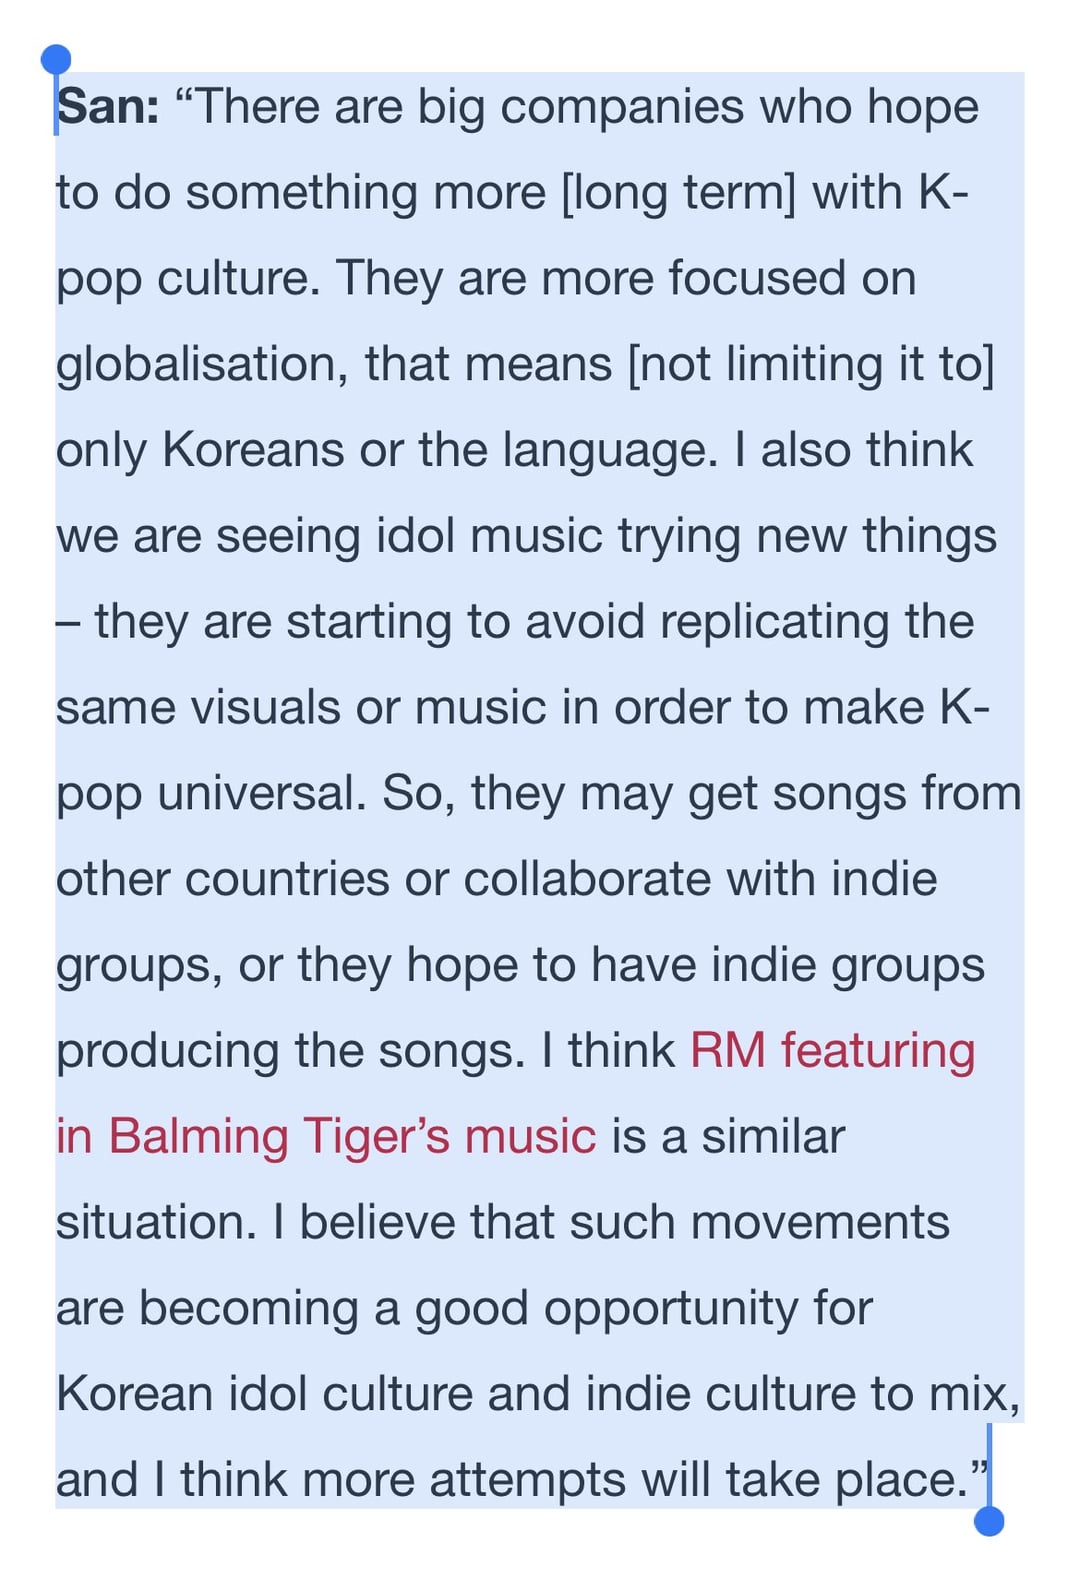 Balming Tiger's San Yawn mentions RM collaboration as an example of growing opportunities for K-pop and K-indie to mix - 131023